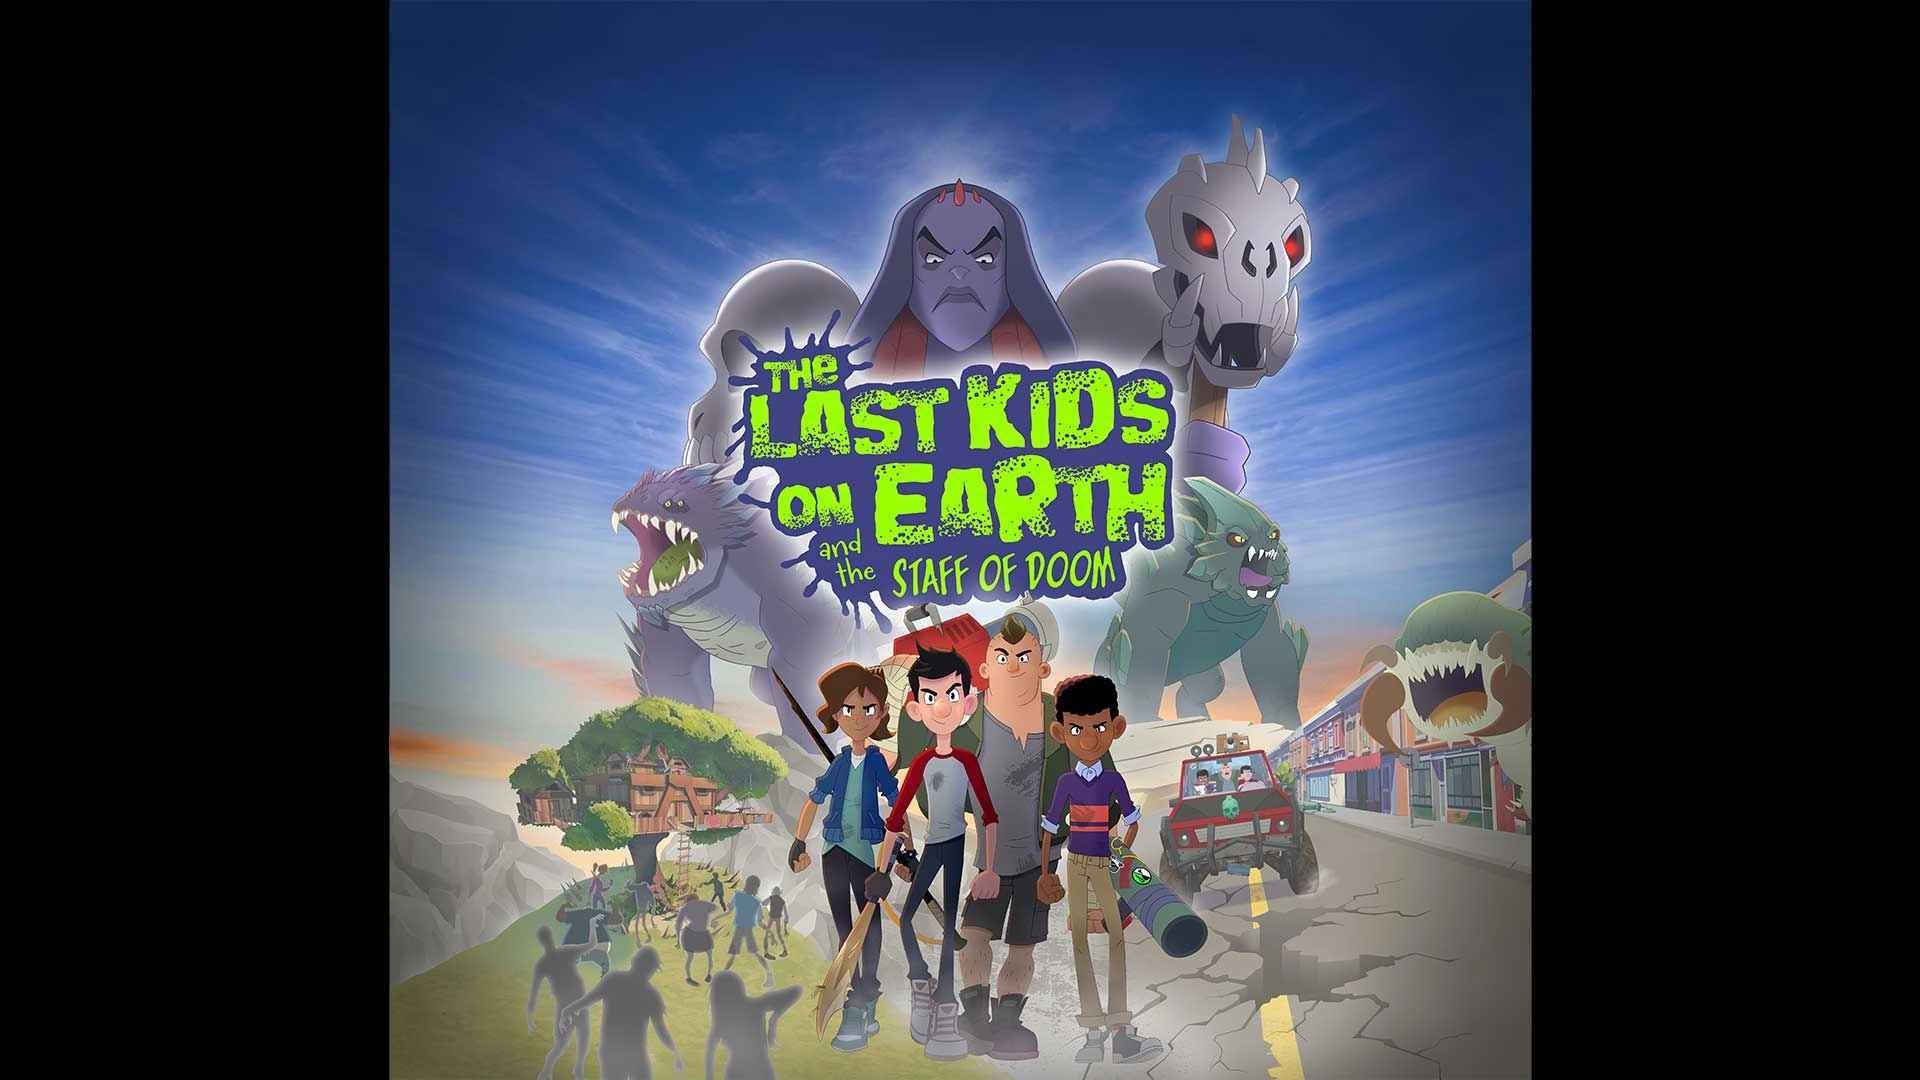 The Last Kids on Earth and The Staff of Doom